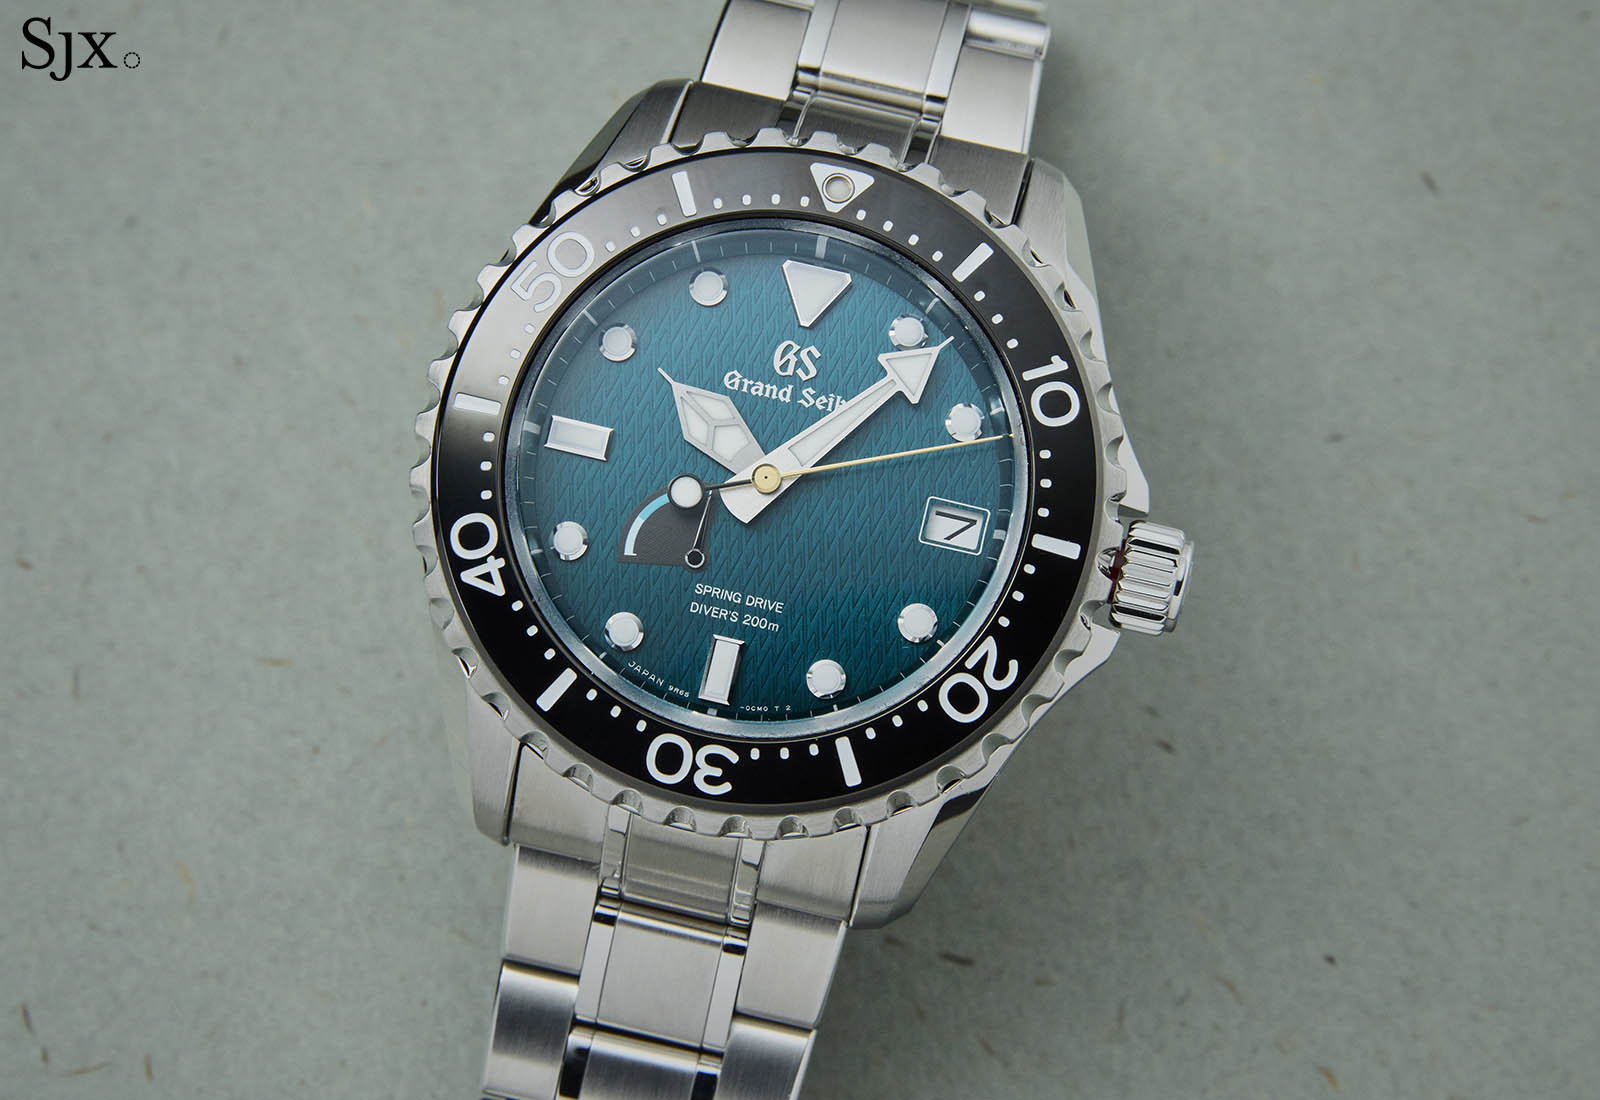 Up Close with the Grand Seiko Spring Drive Diver Asia Edition SBGA391G |  SJX Watches